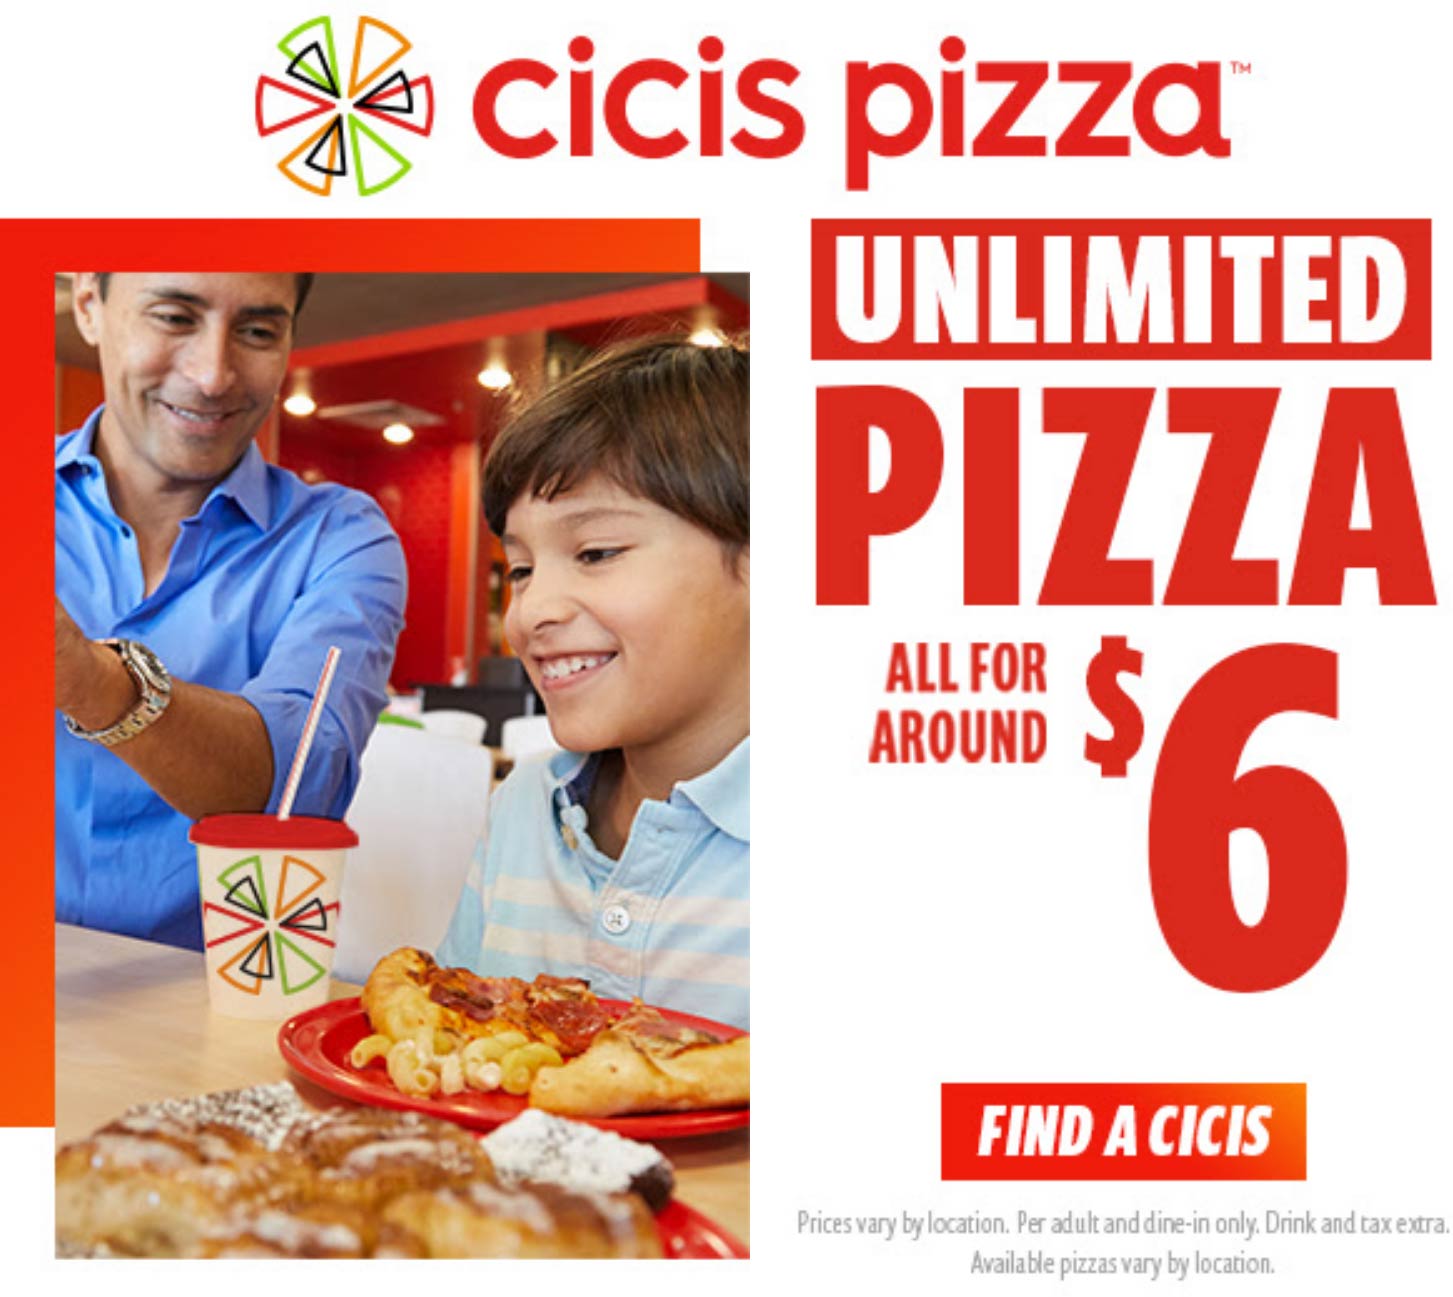 Cicis restaurants Coupon  Unlimiited pizza for $6 at Cicis restaurants #cicis 